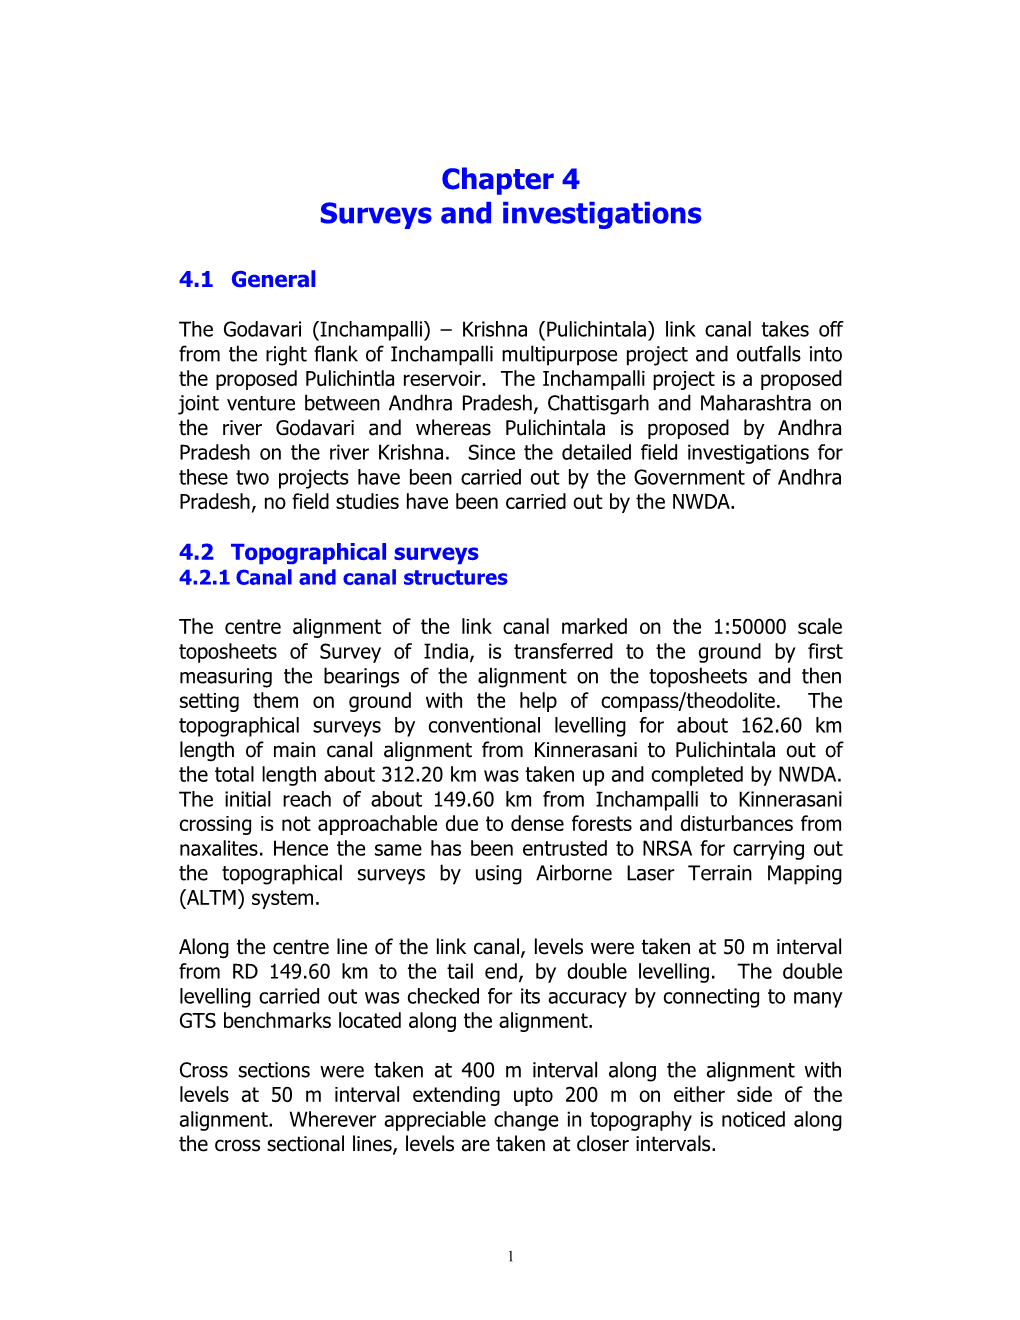 Chapter 4 Surveys and Investigations